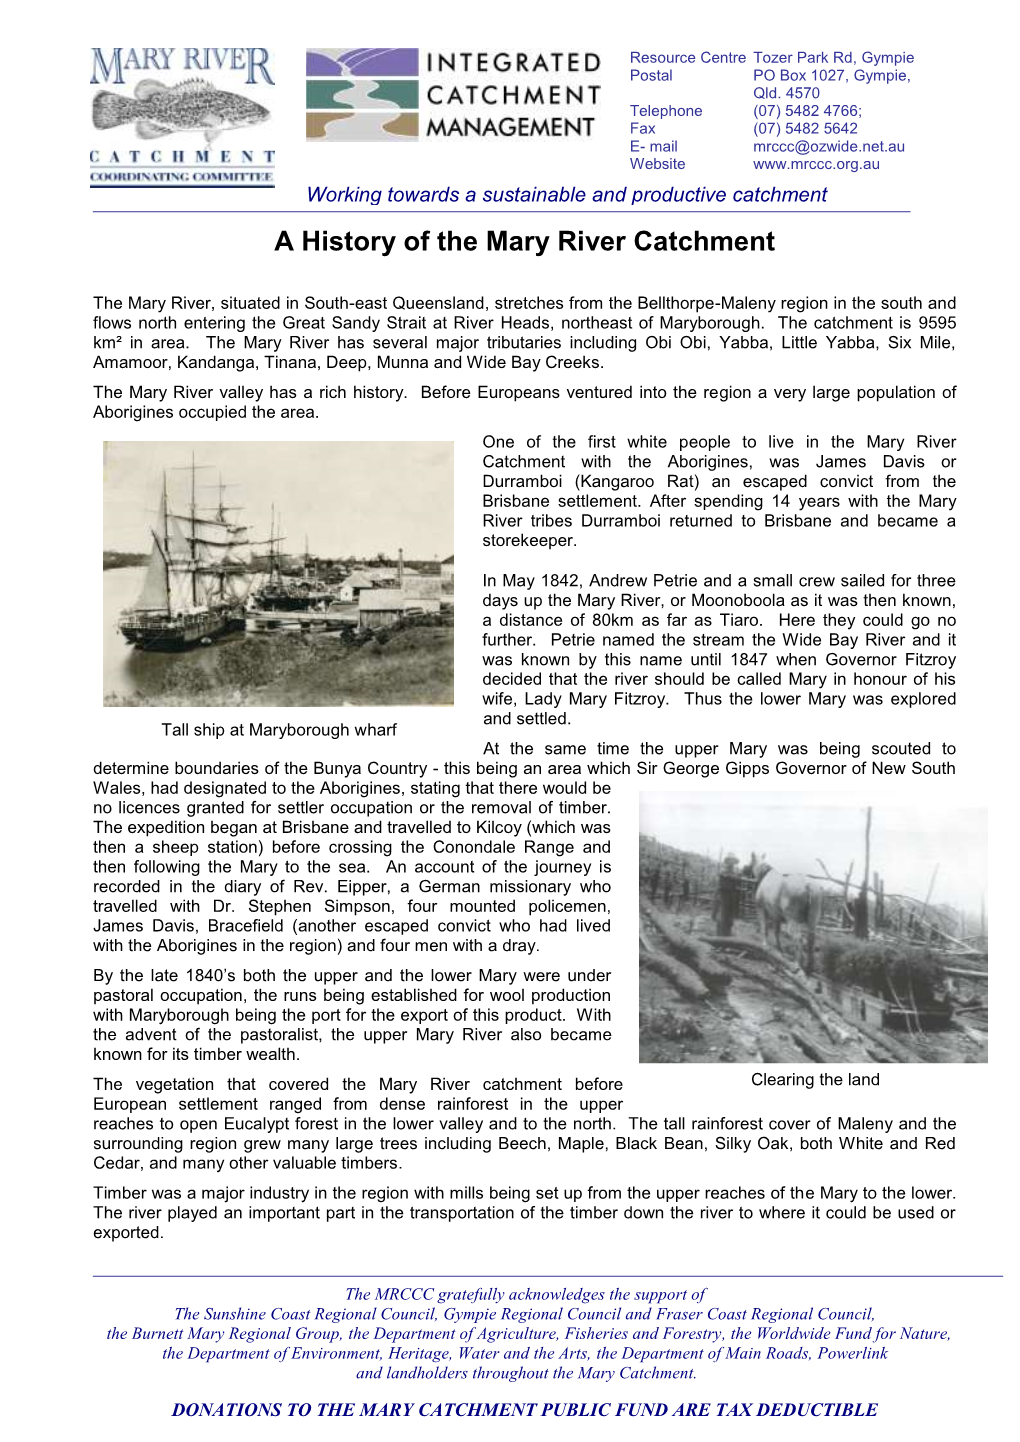 History of the Mary River Catchment